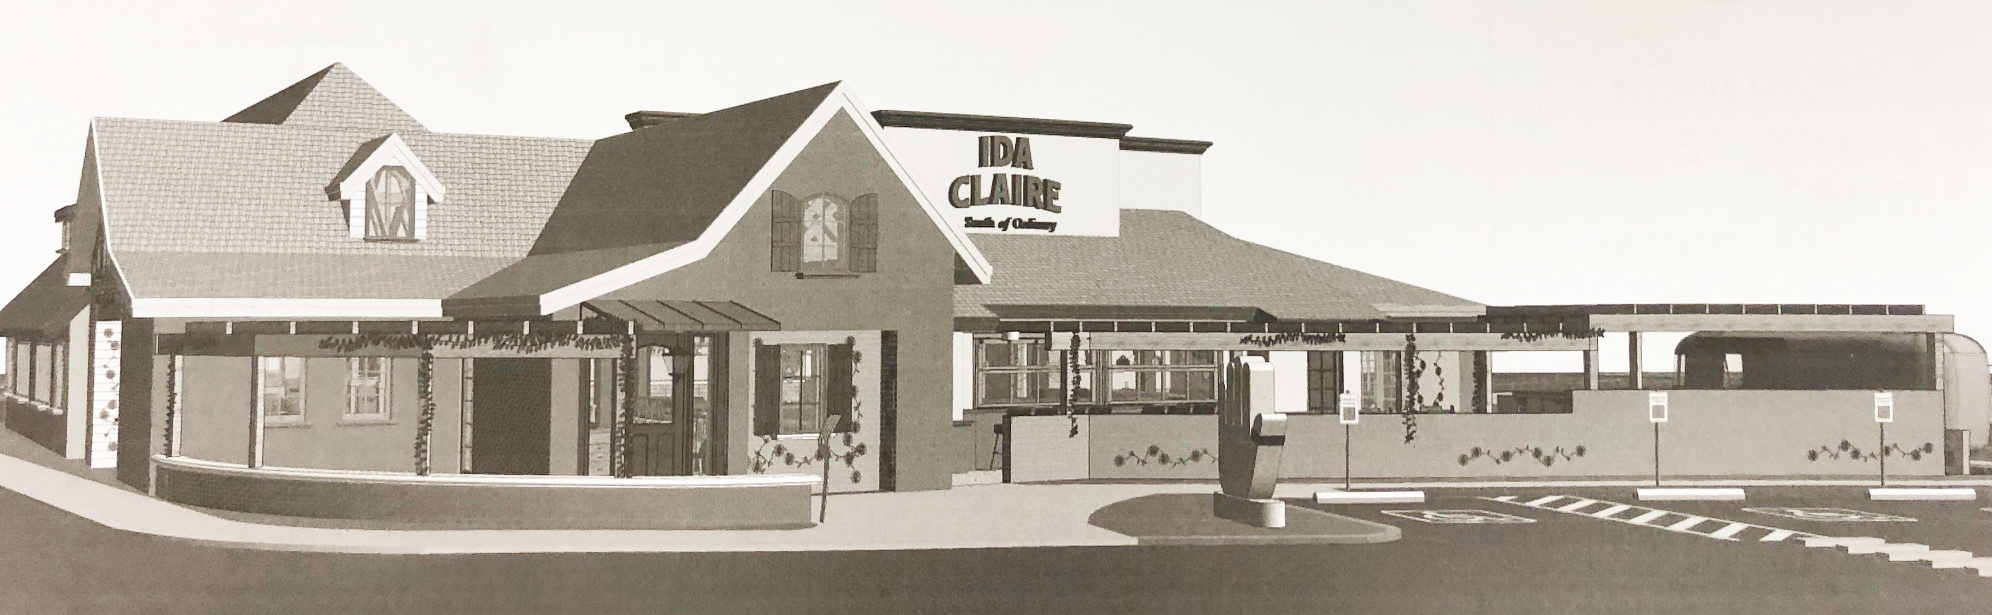 Plans for Ida Claire, South of Ordinary, at 10209 Rivercoast Drive at St. Johns Town Center. The restaurant will go in the space now occupied by Mimi’s Cafe.